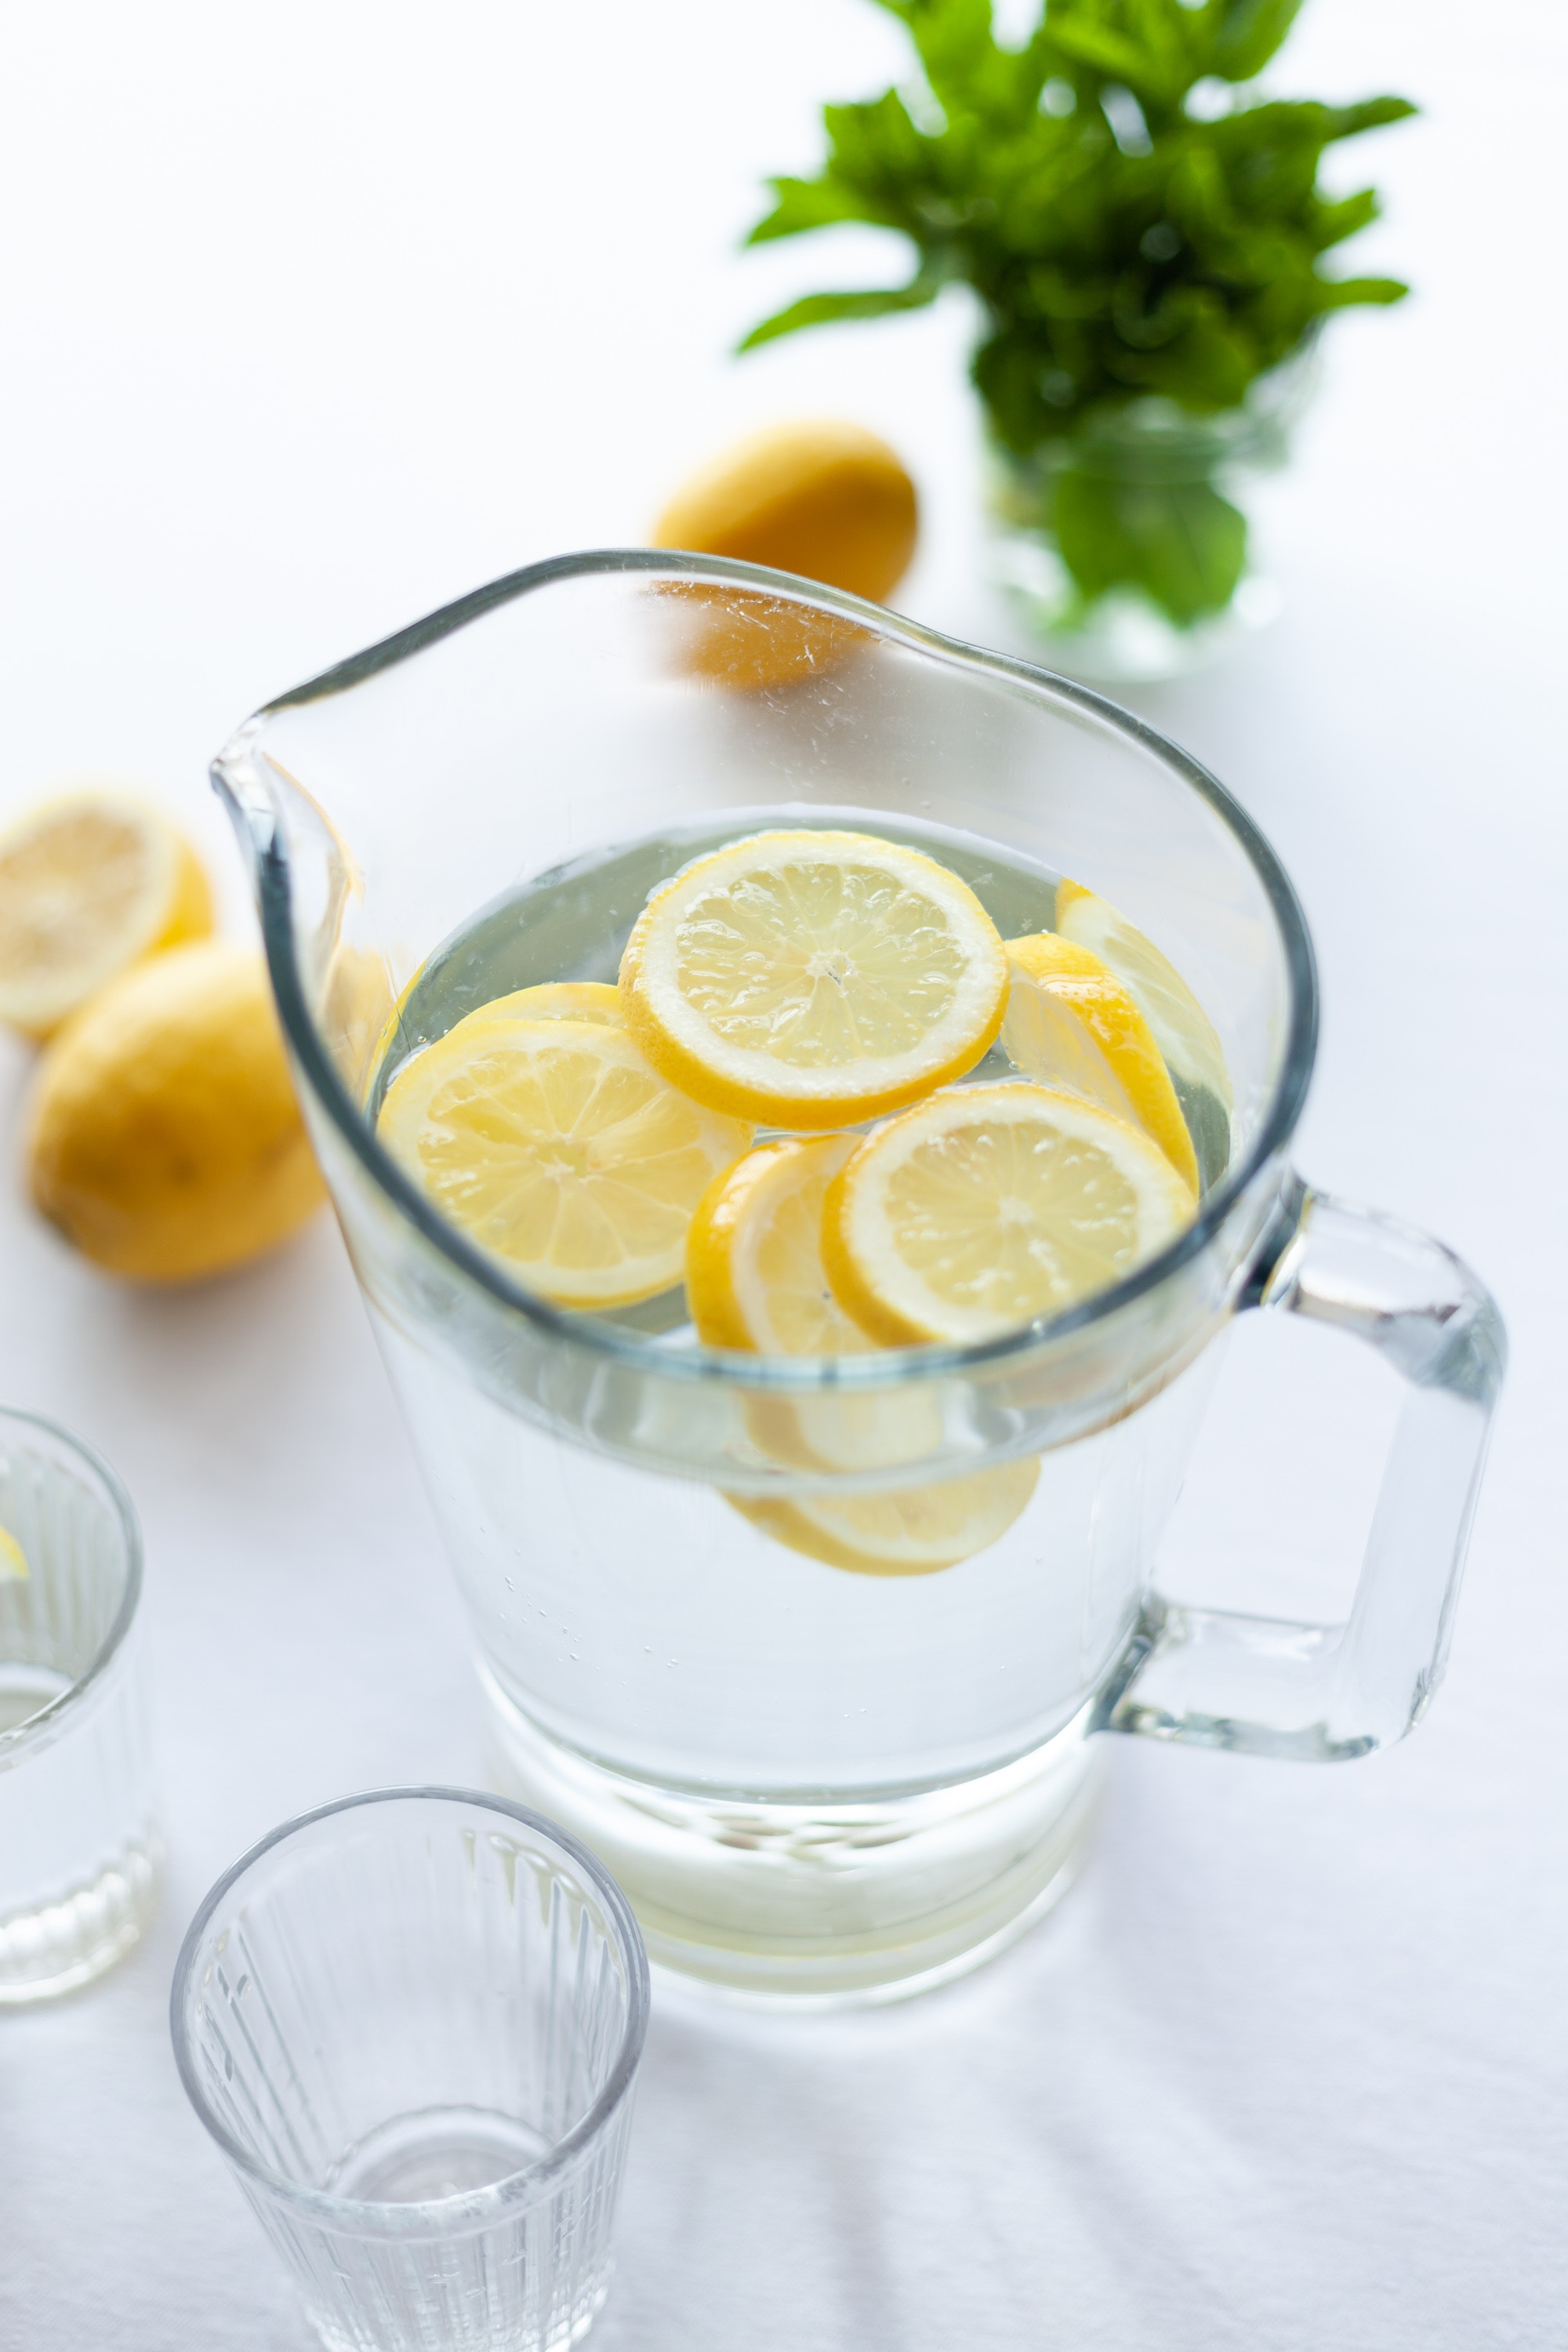 Lemons floating in a pitcher of water with lemons and greens in the background